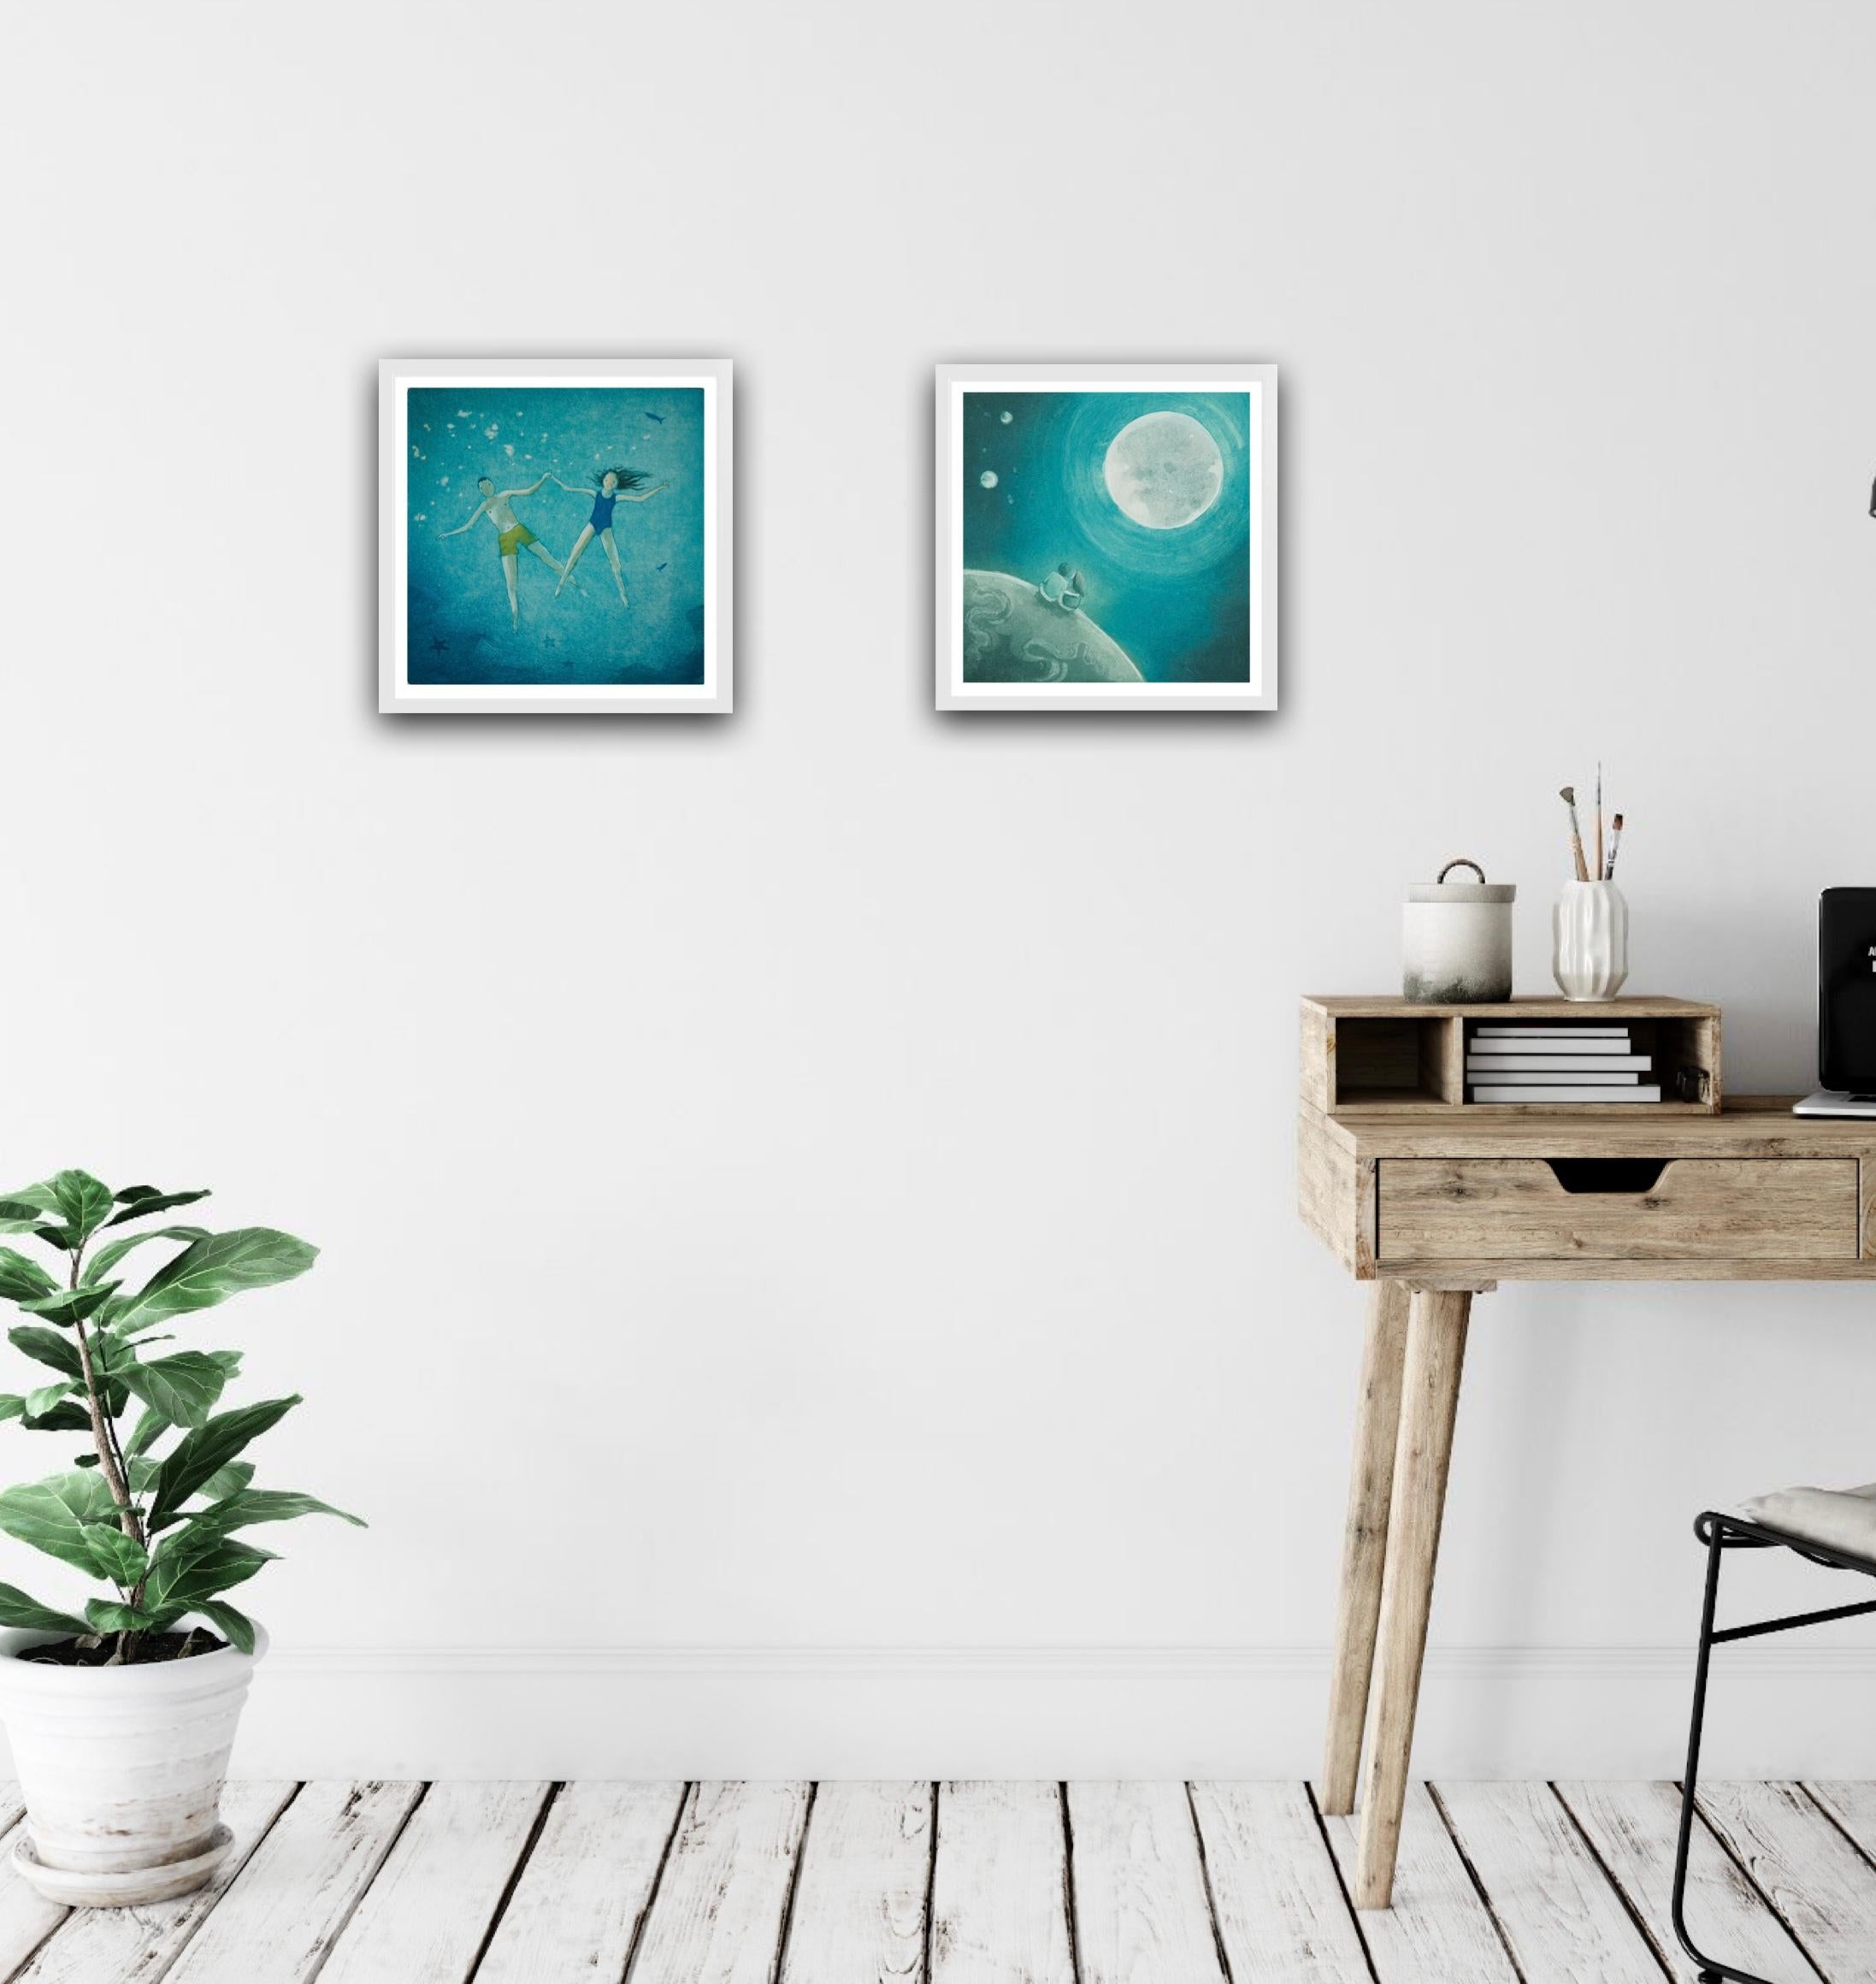 Moongazers and Floating diptych - Blue Landscape Print by Rebecca Denton